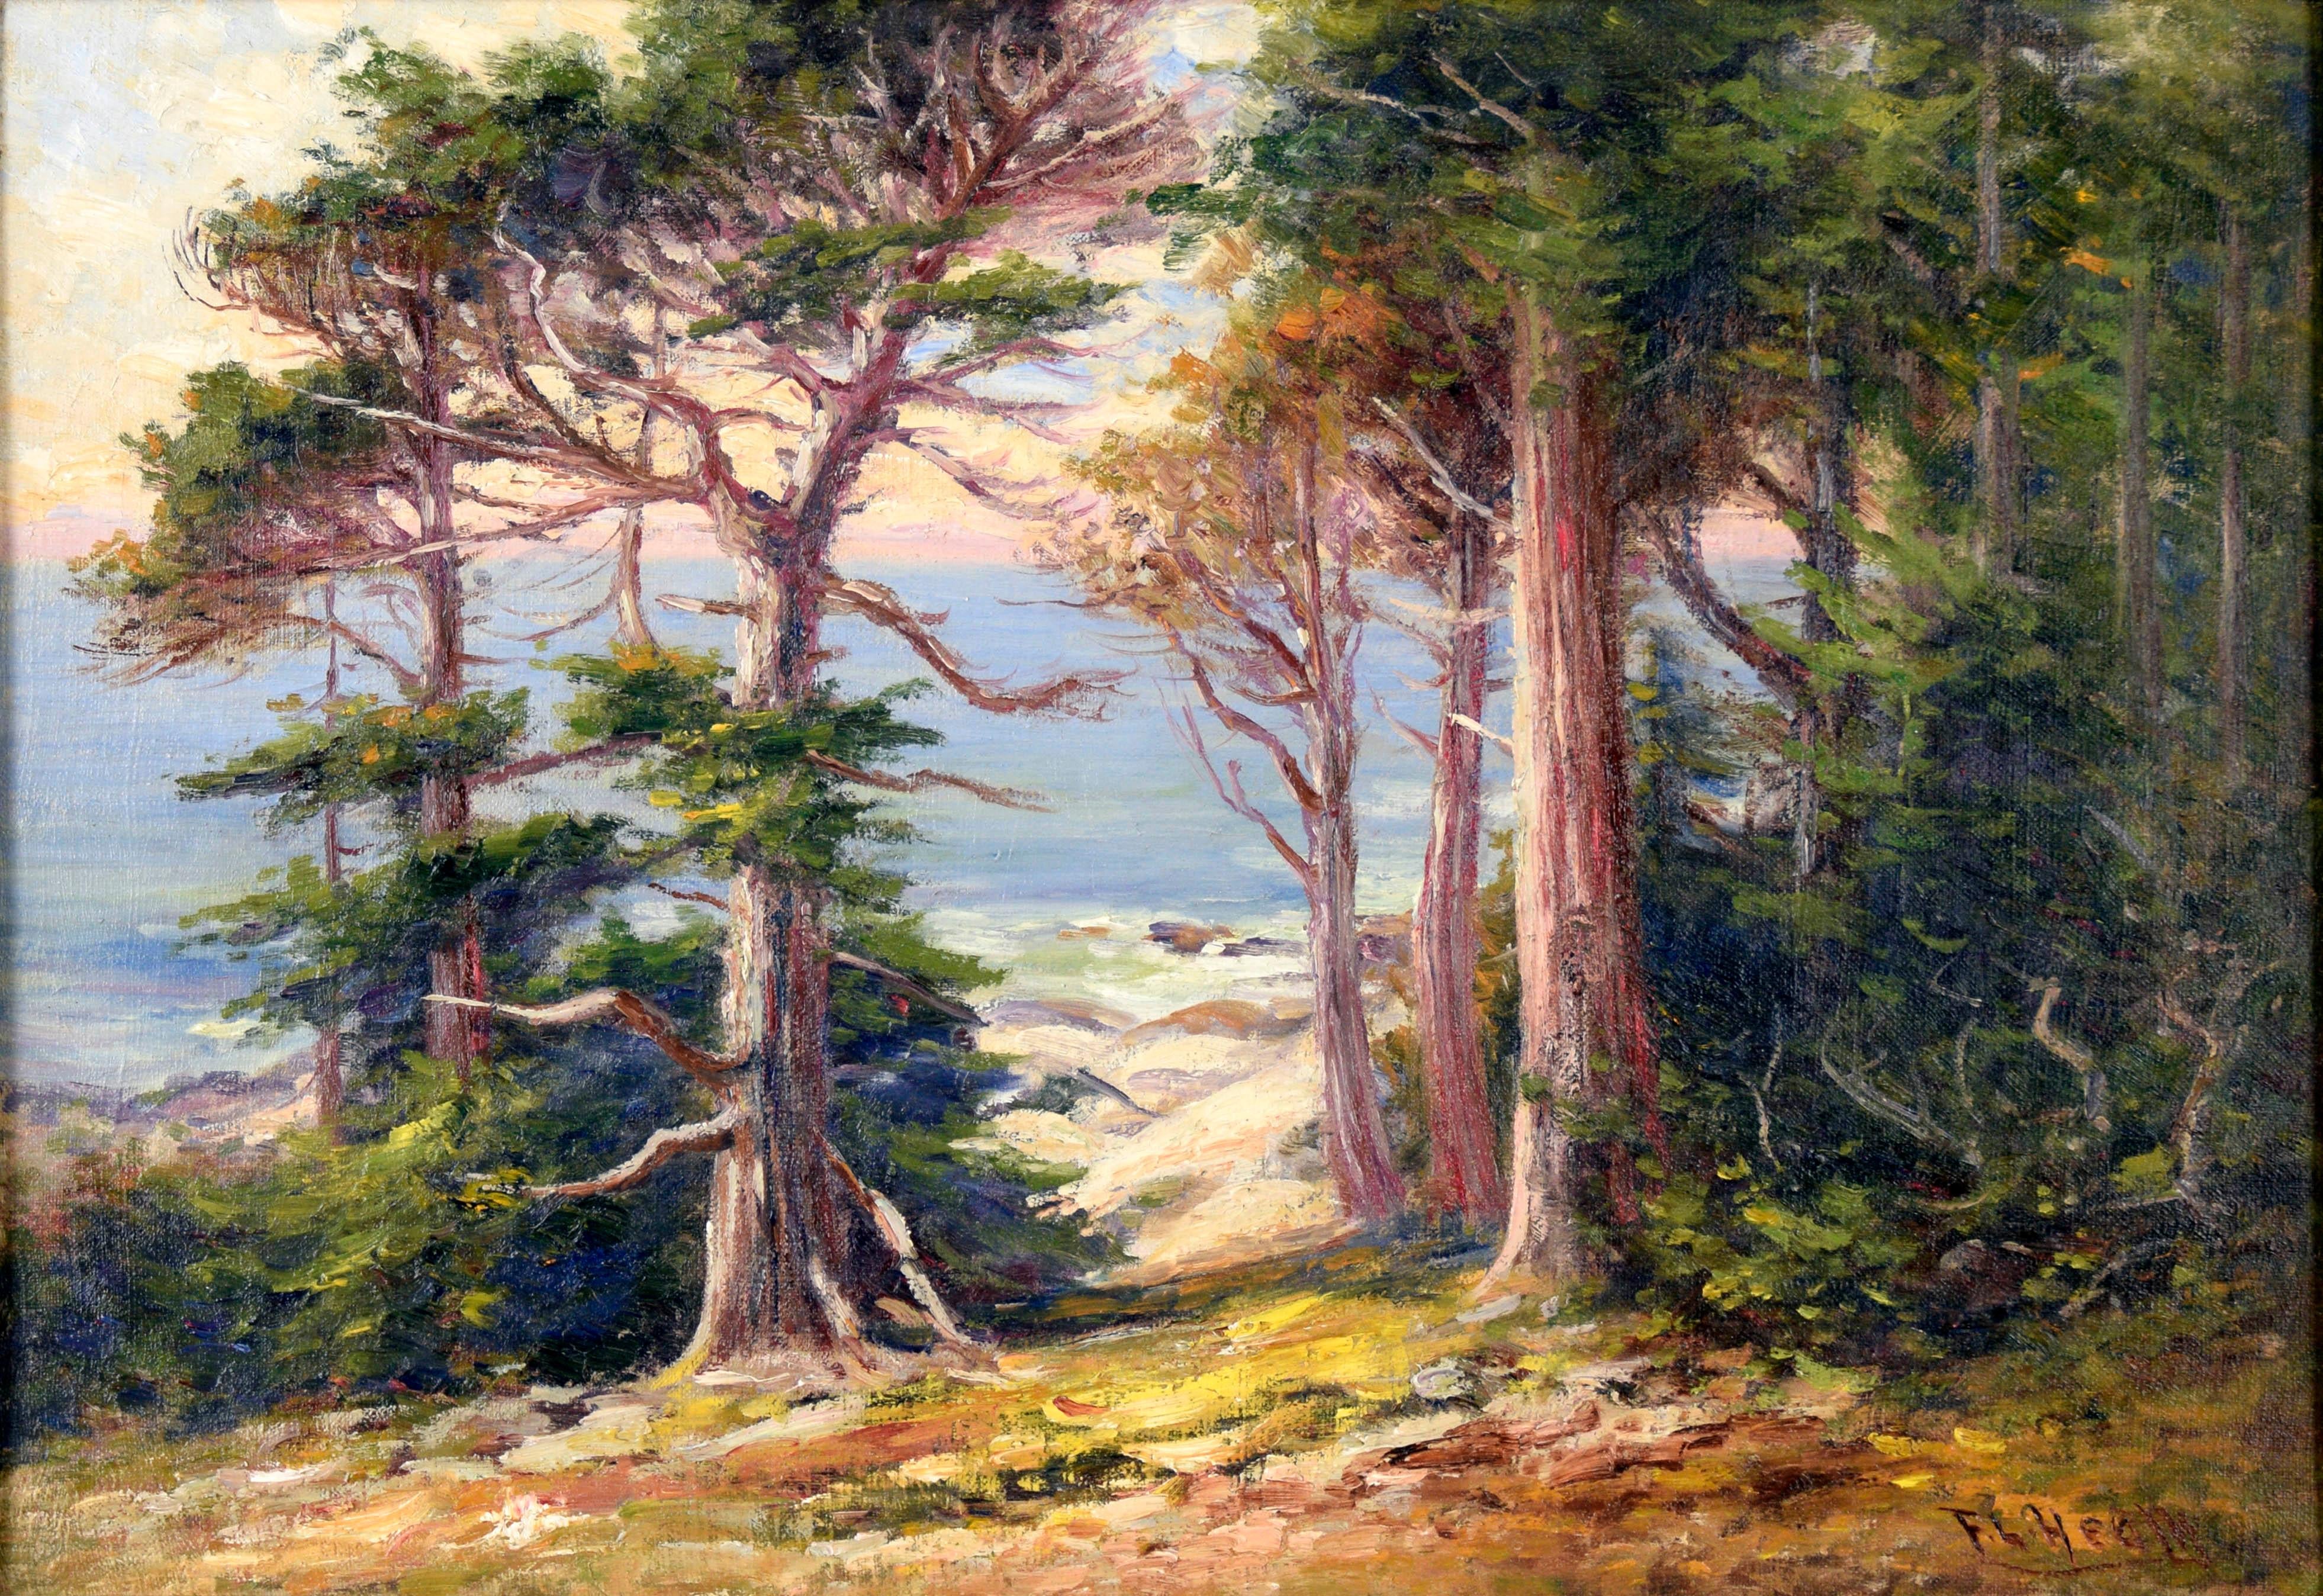 Old 17 Mile Drive, Carmel California Landscape Early 1900s Oil on Linen
Gorgeous early 20th century landscape of rugged Carmel Old 17 Mile Drive coastline by Frank Lucien Heath (American, 1857-1921), circa 1900. The blue misty Pacific Ocean can be